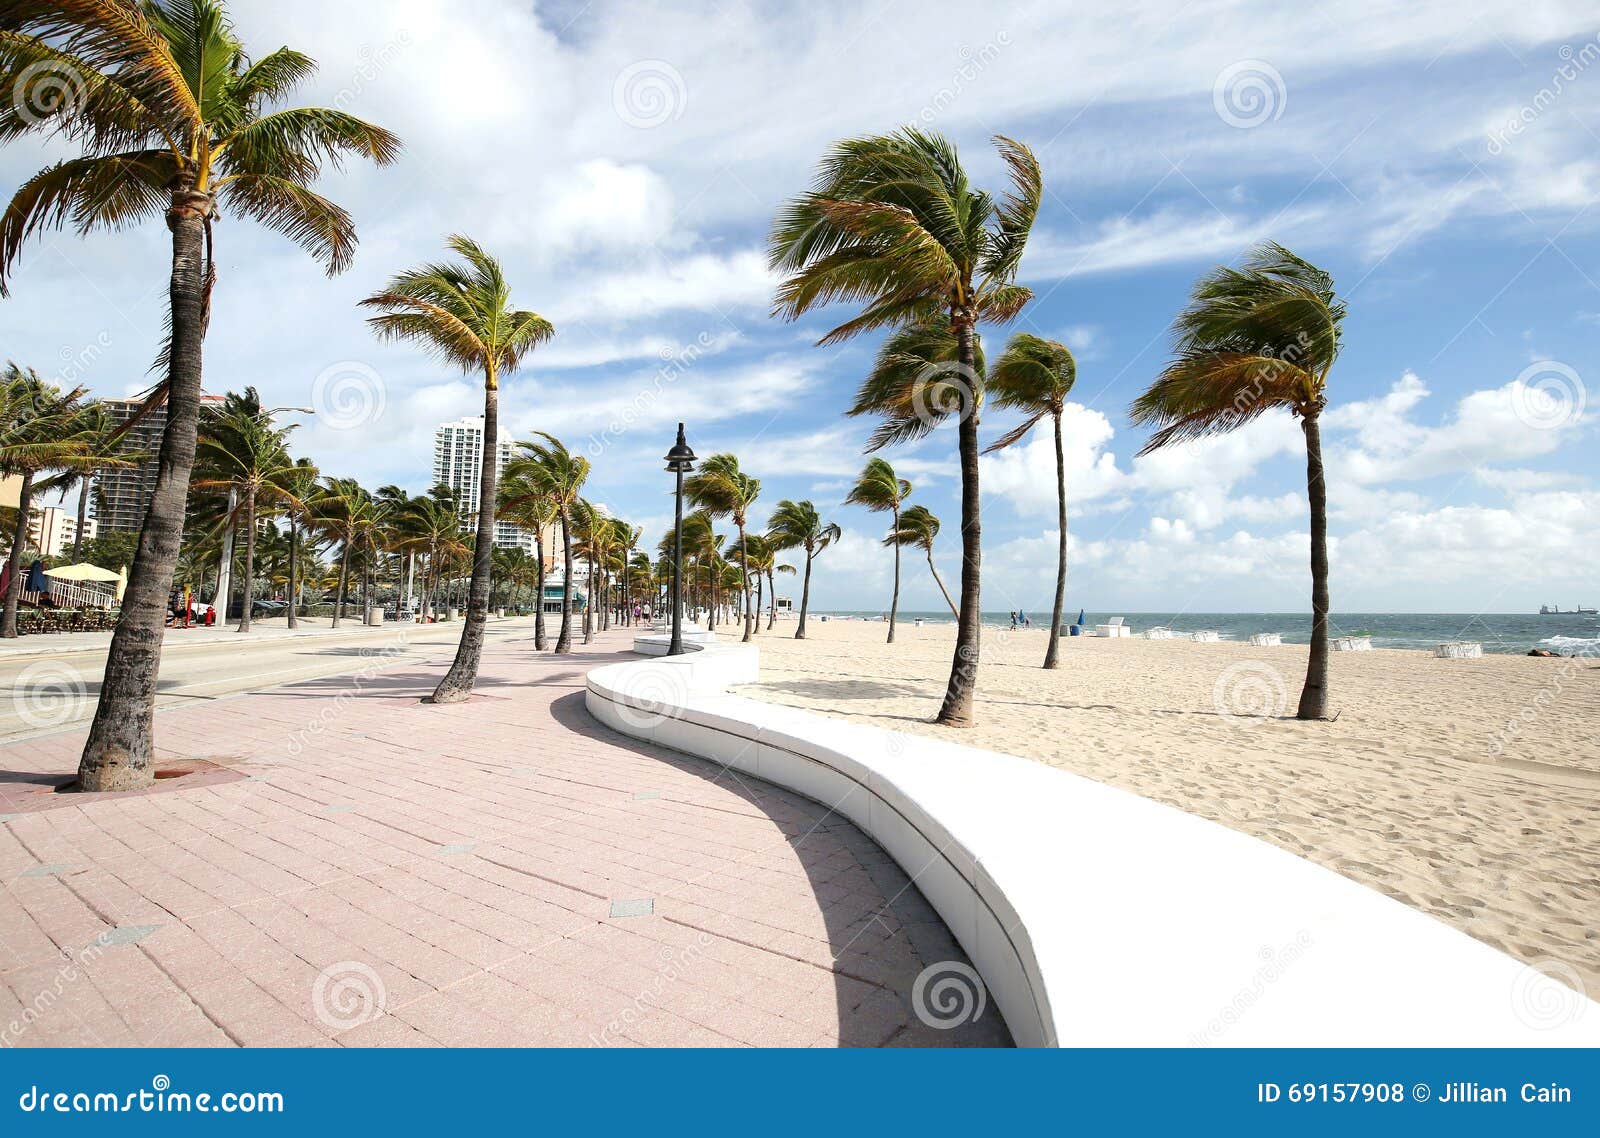 curved wall and blowing palm trees on fort lauderdale beach